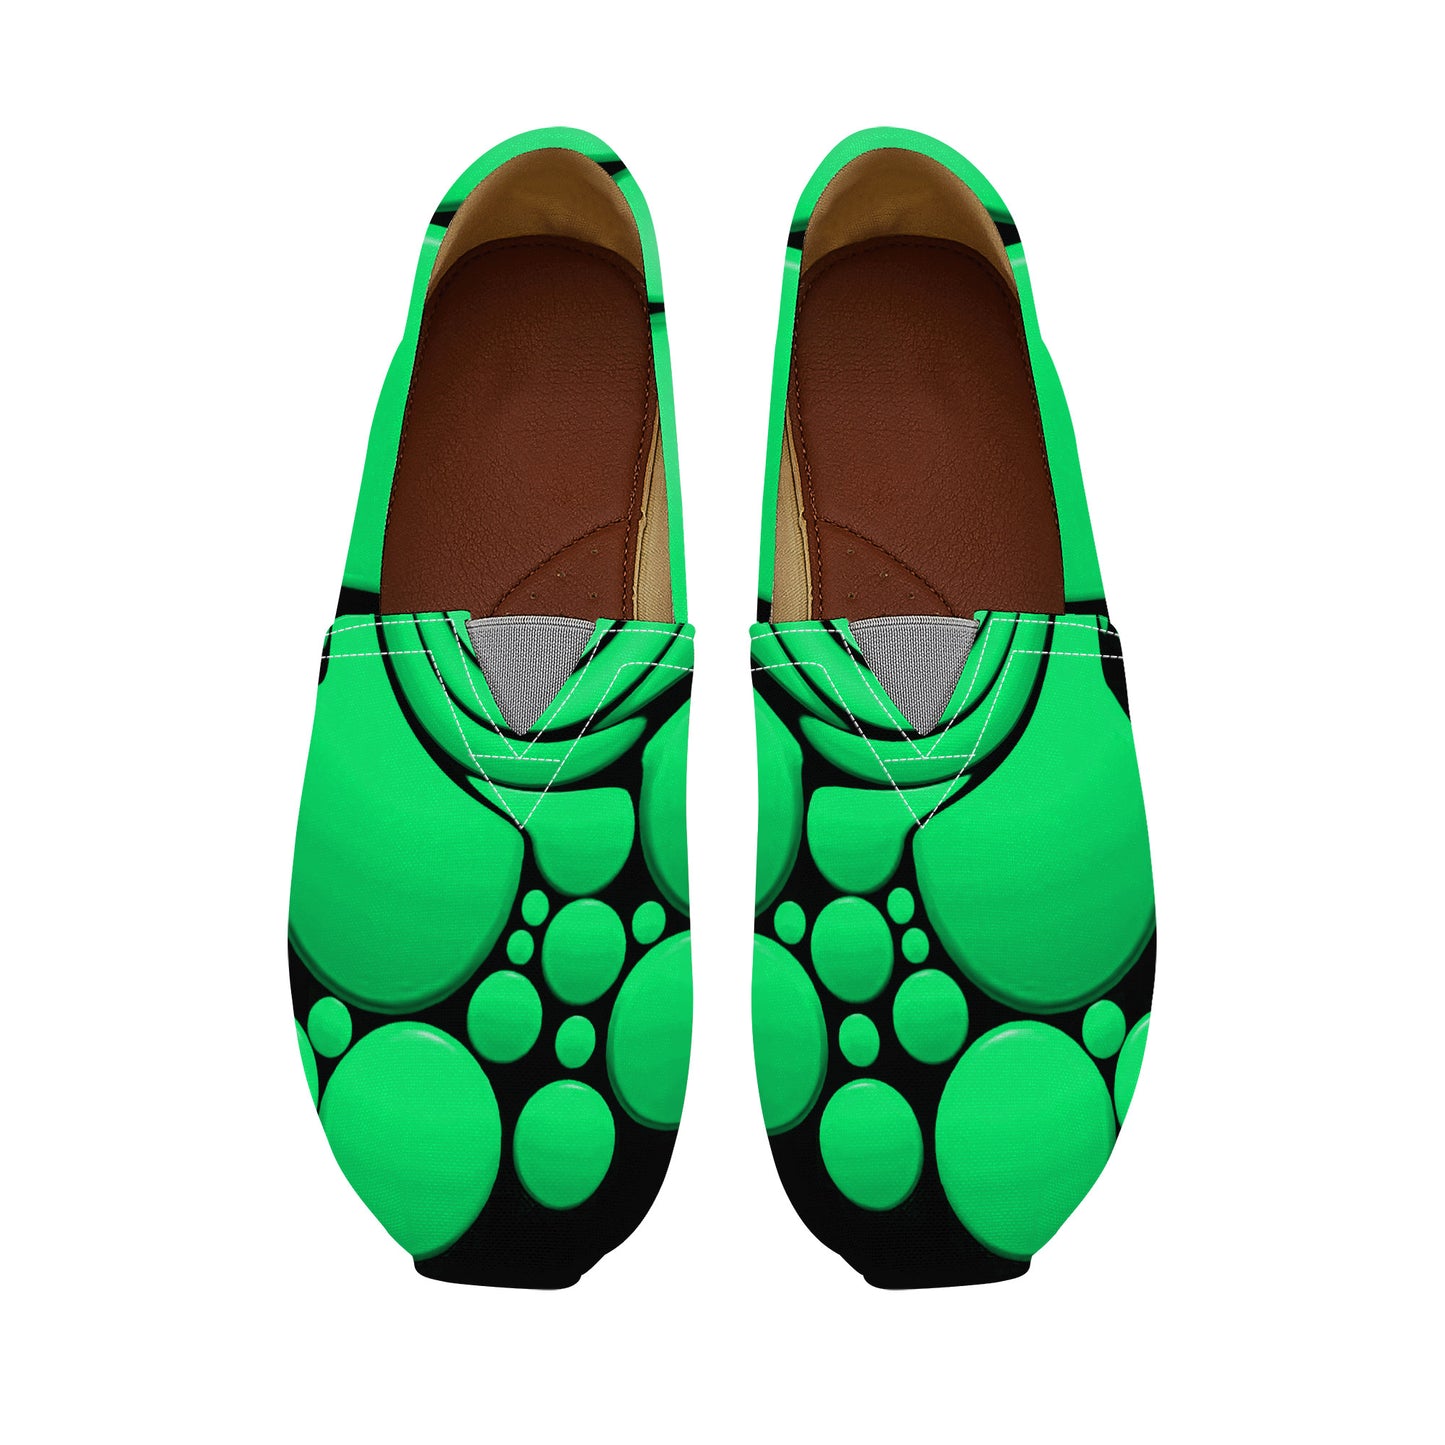 Green Twisted Ellipses Casual Flat Driving Shoe